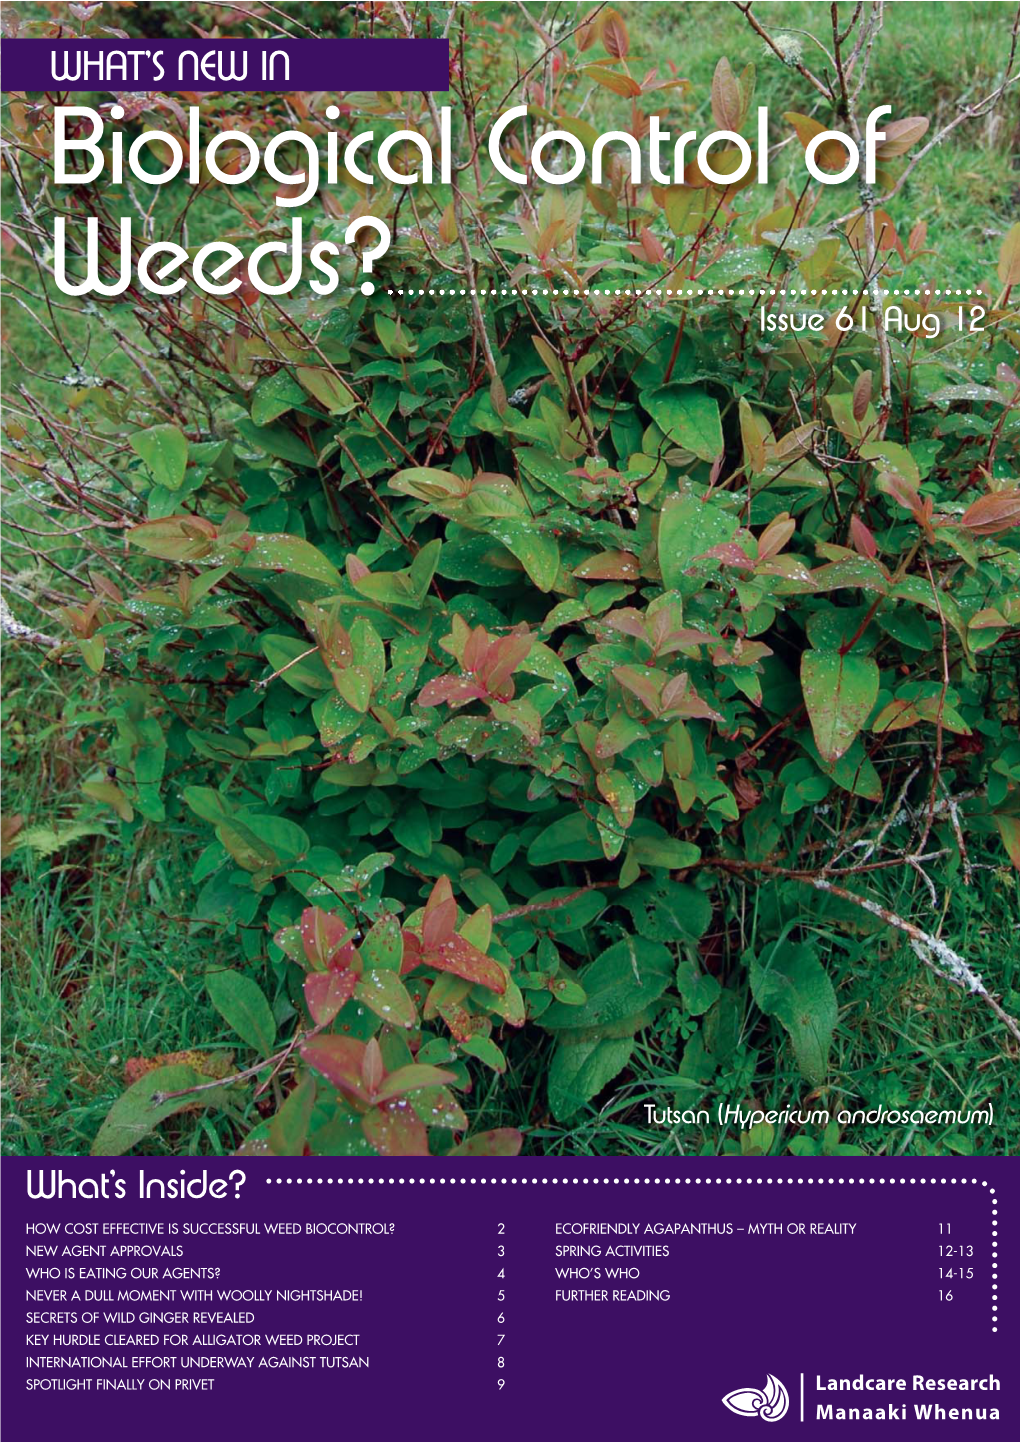 How Cost Effective Is Successful Weed Biocontrol?